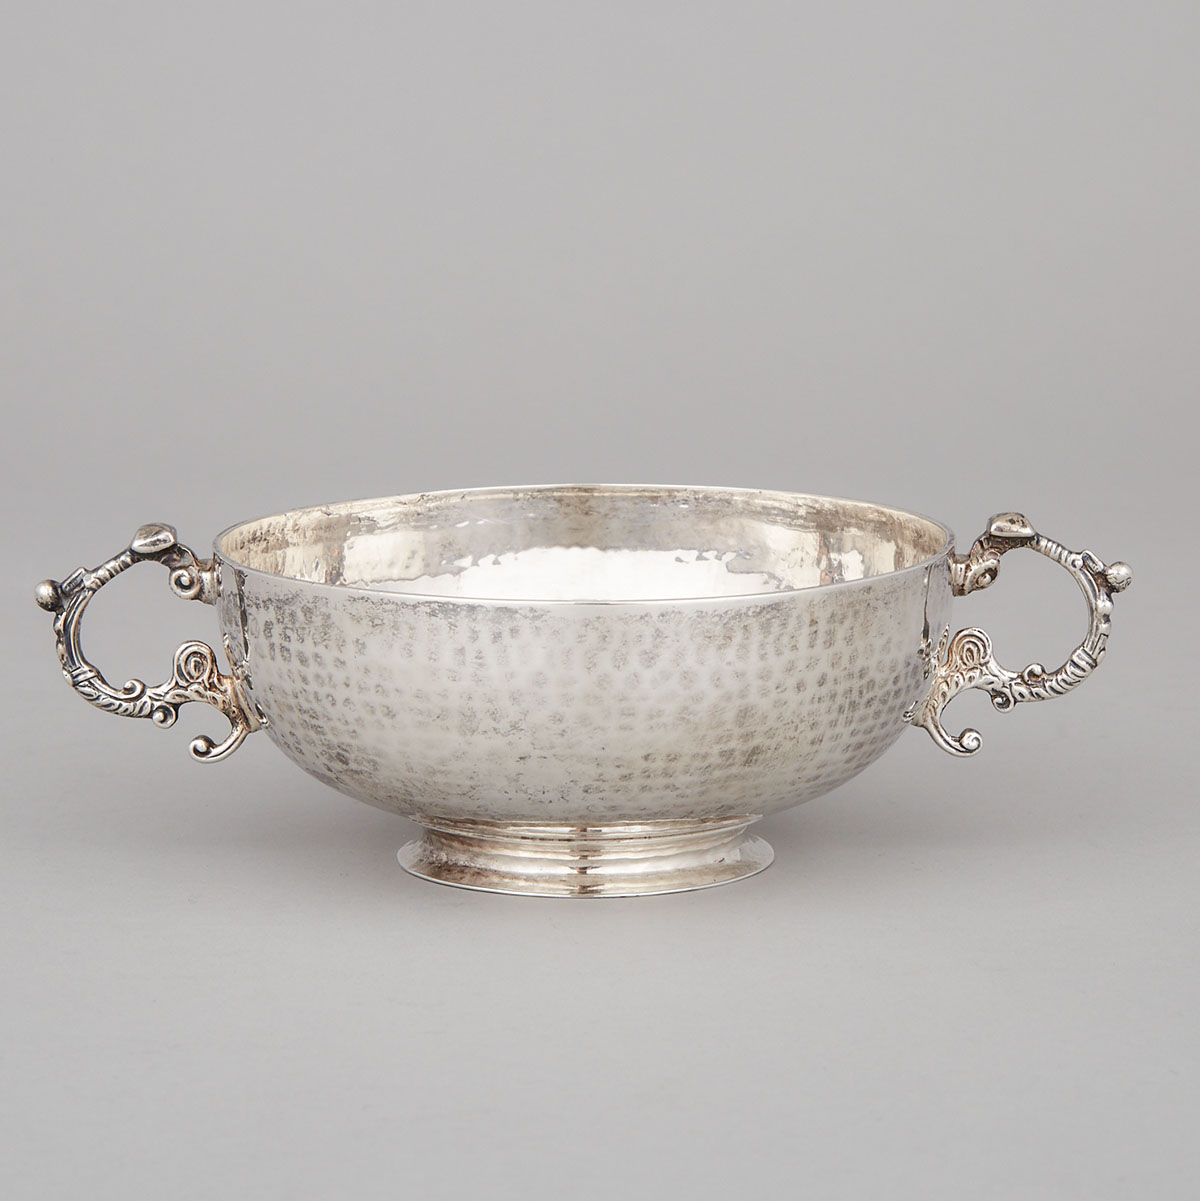 Edwardian Silver Two-Handled Bowl, George Nathan & Ridley Hayes, Chester, 1907